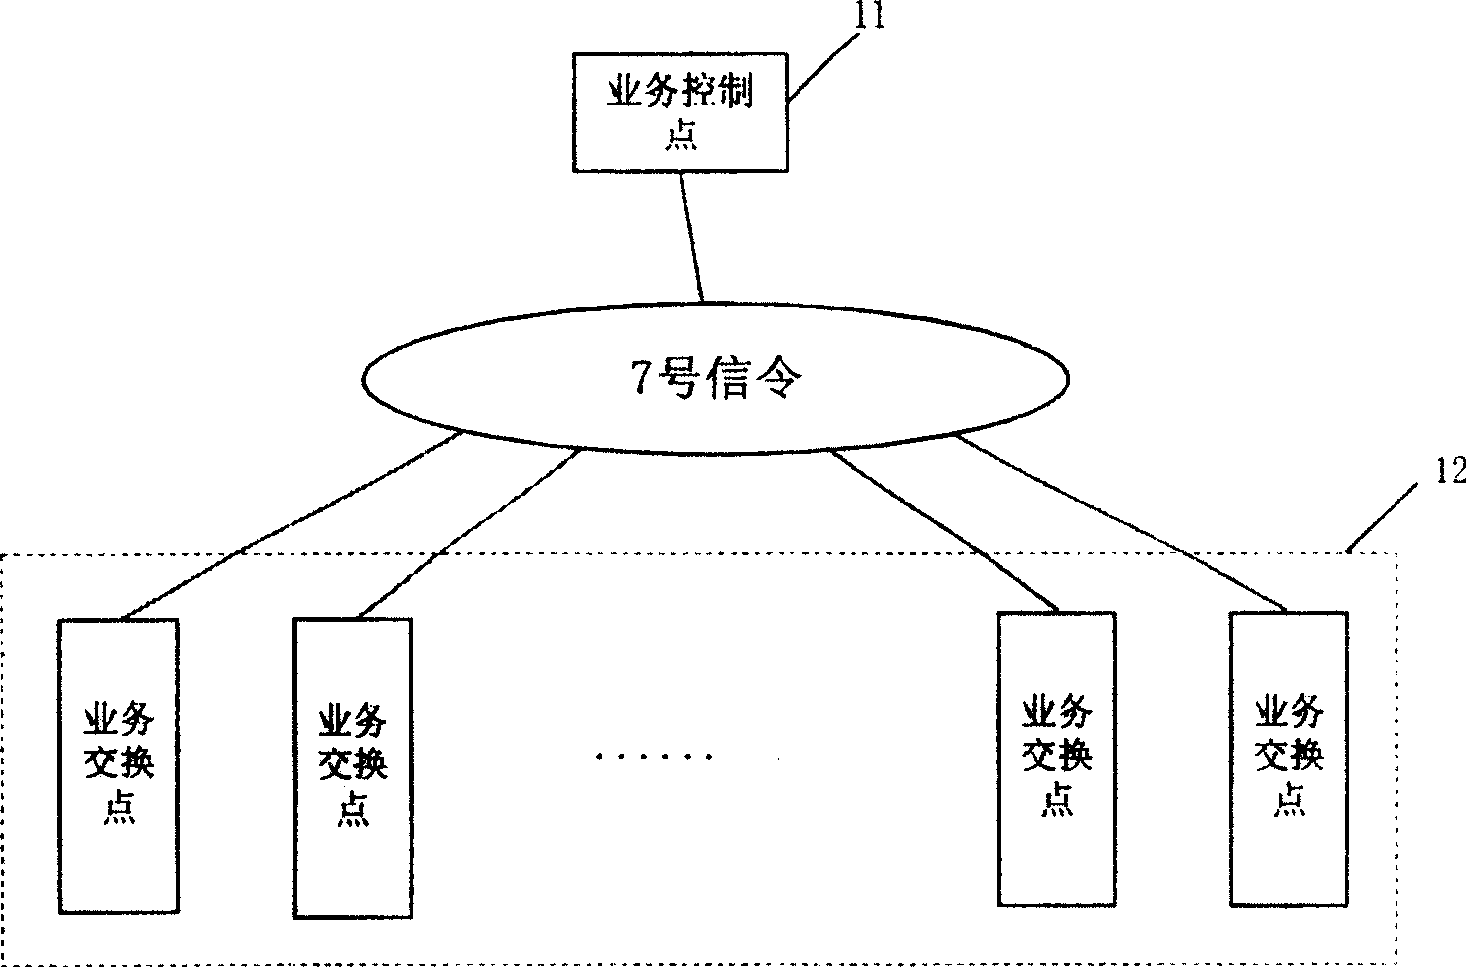 Fault detecting method and device thereof